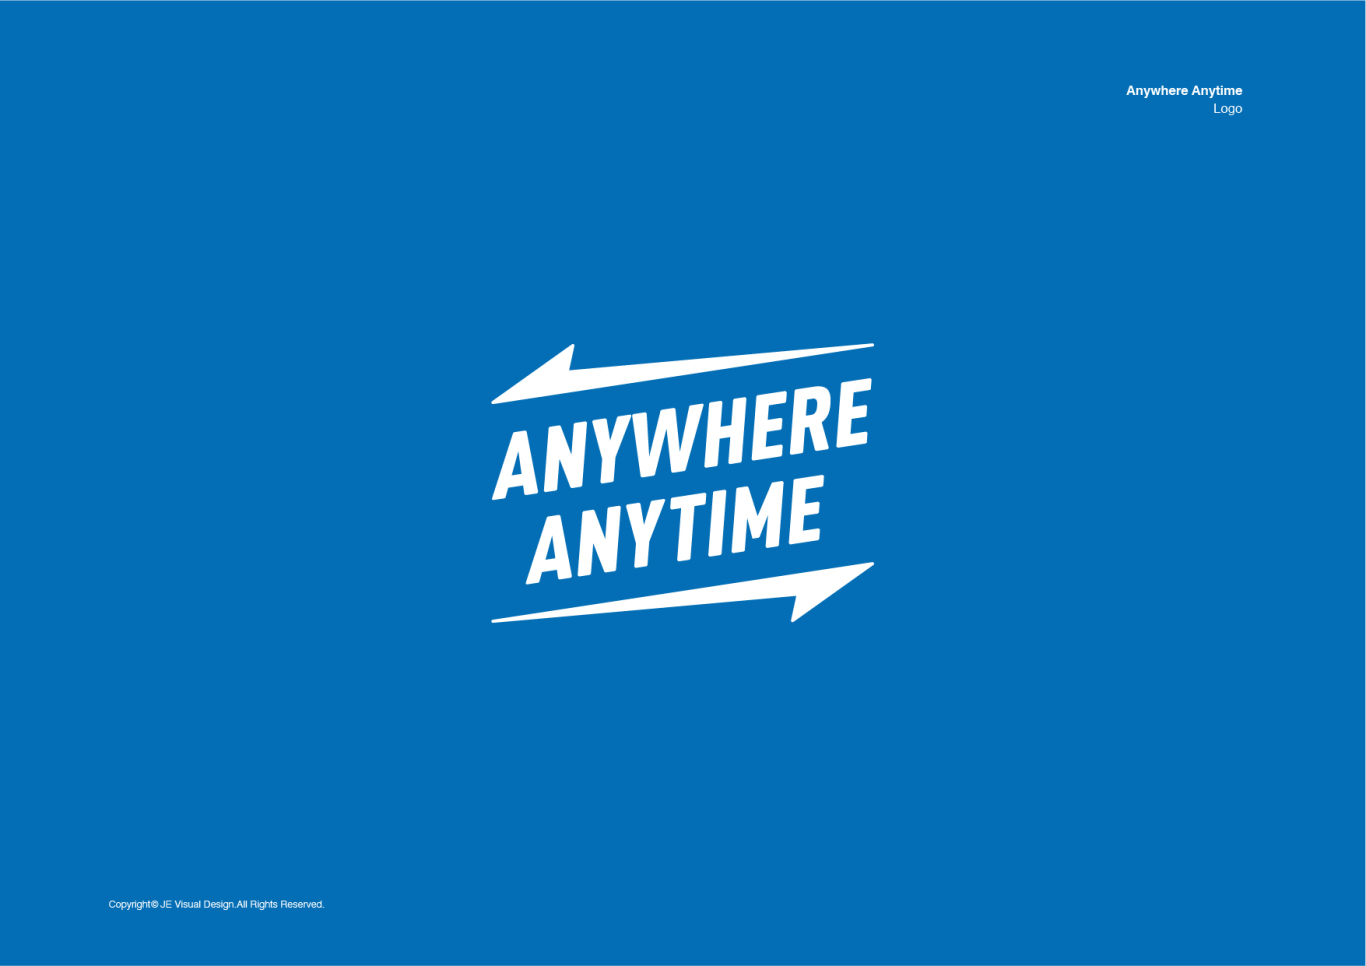 Anywhere Anytime logo设计图17